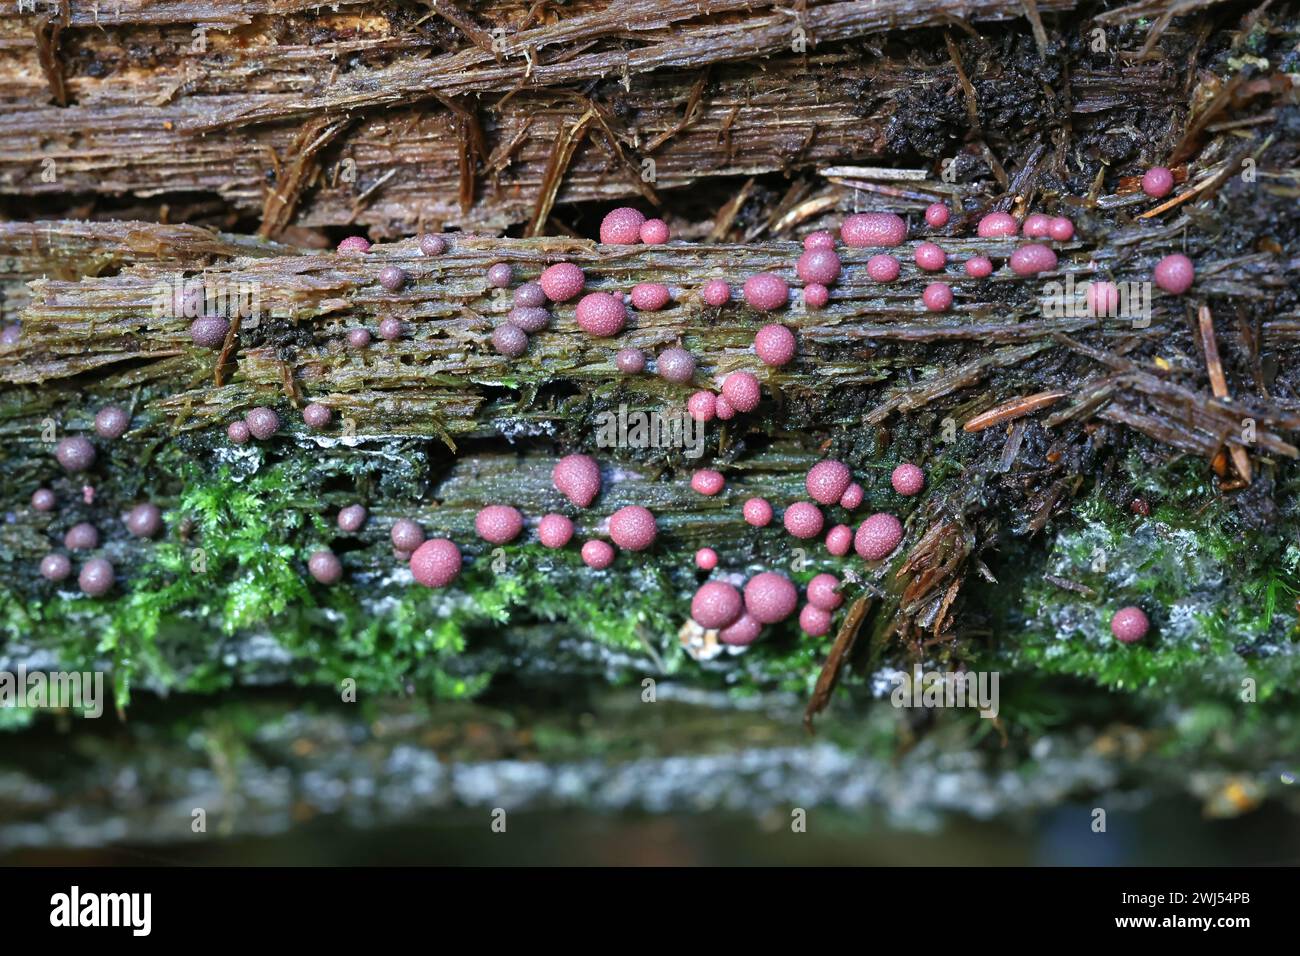 Lycogala roseosporum, commonly known as wolf's milk, slime mold from Finland Stock Photo